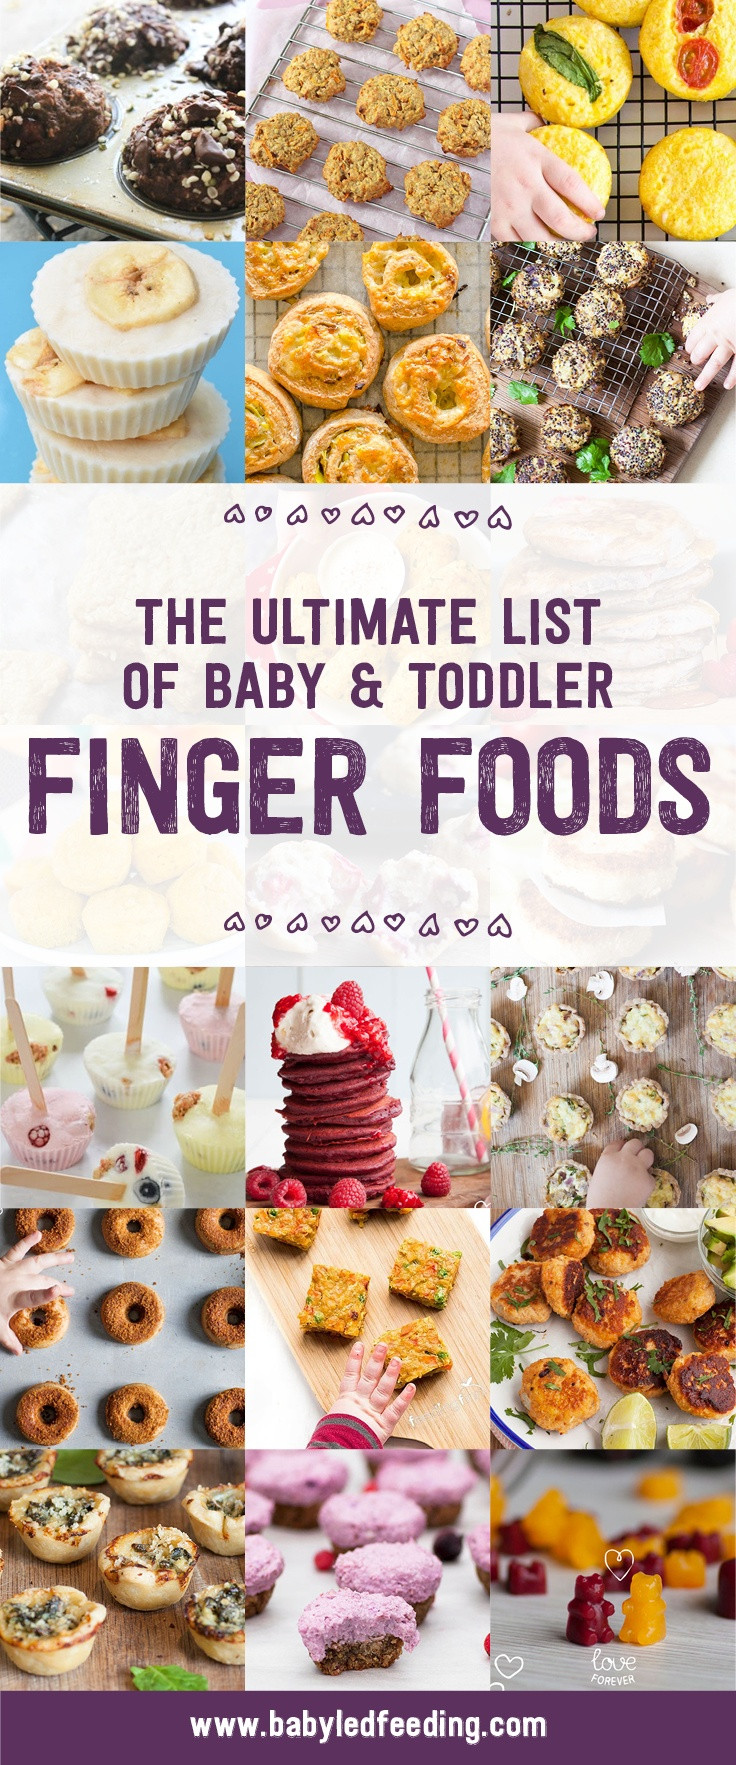 Real Baby Food: Easy, All-Natural Recipes For Your Baby And Toddler
 The Ultimate List of Baby & Toddler Finger Foods Baby